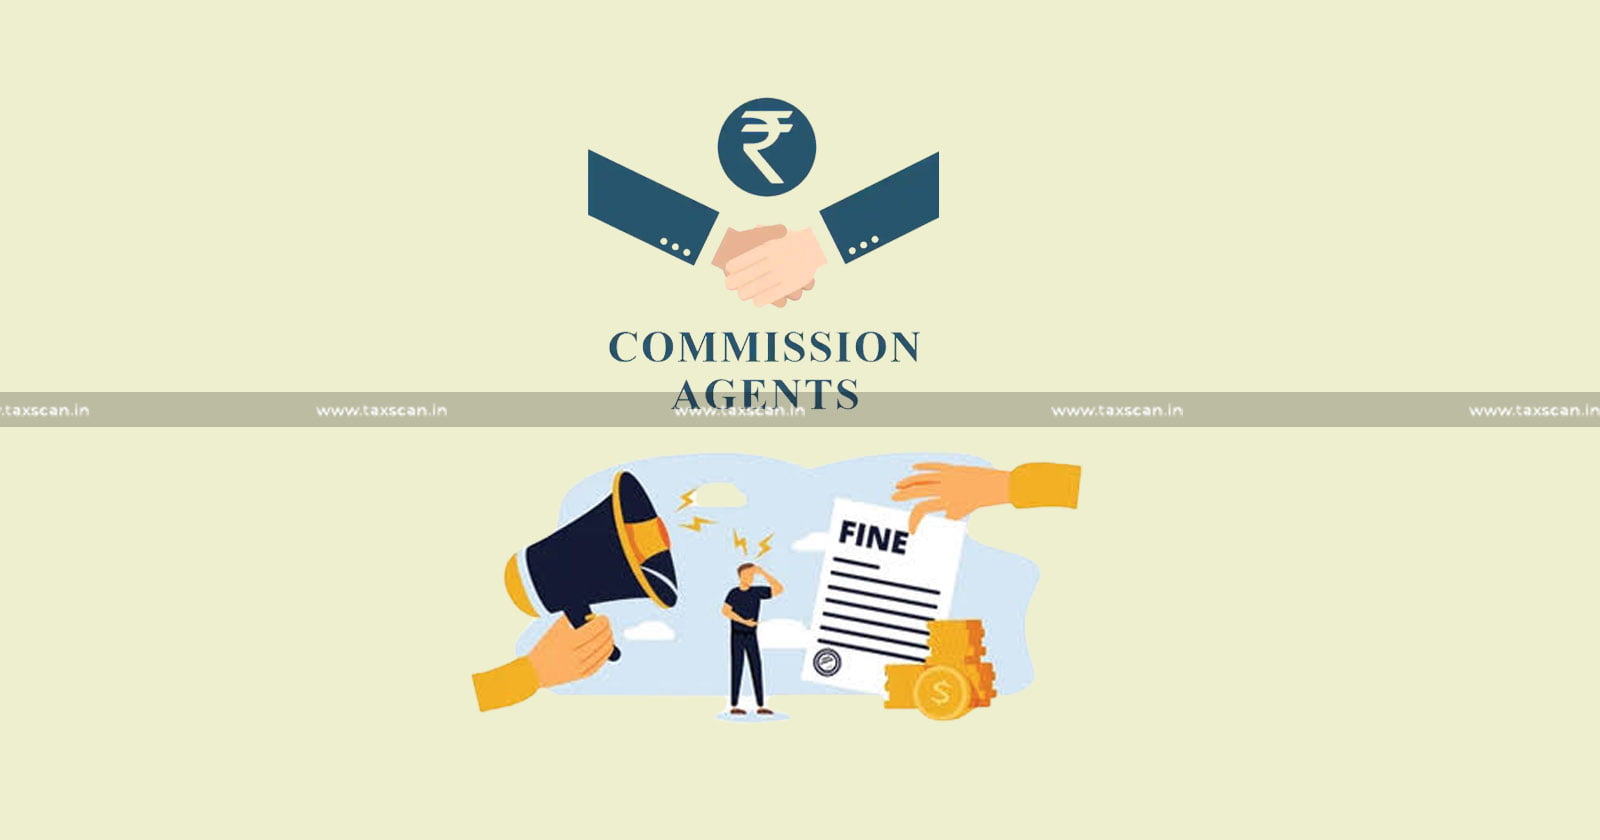 Commission Agent - Account Audited - Audit - Penalty - ITAT - Taxscan